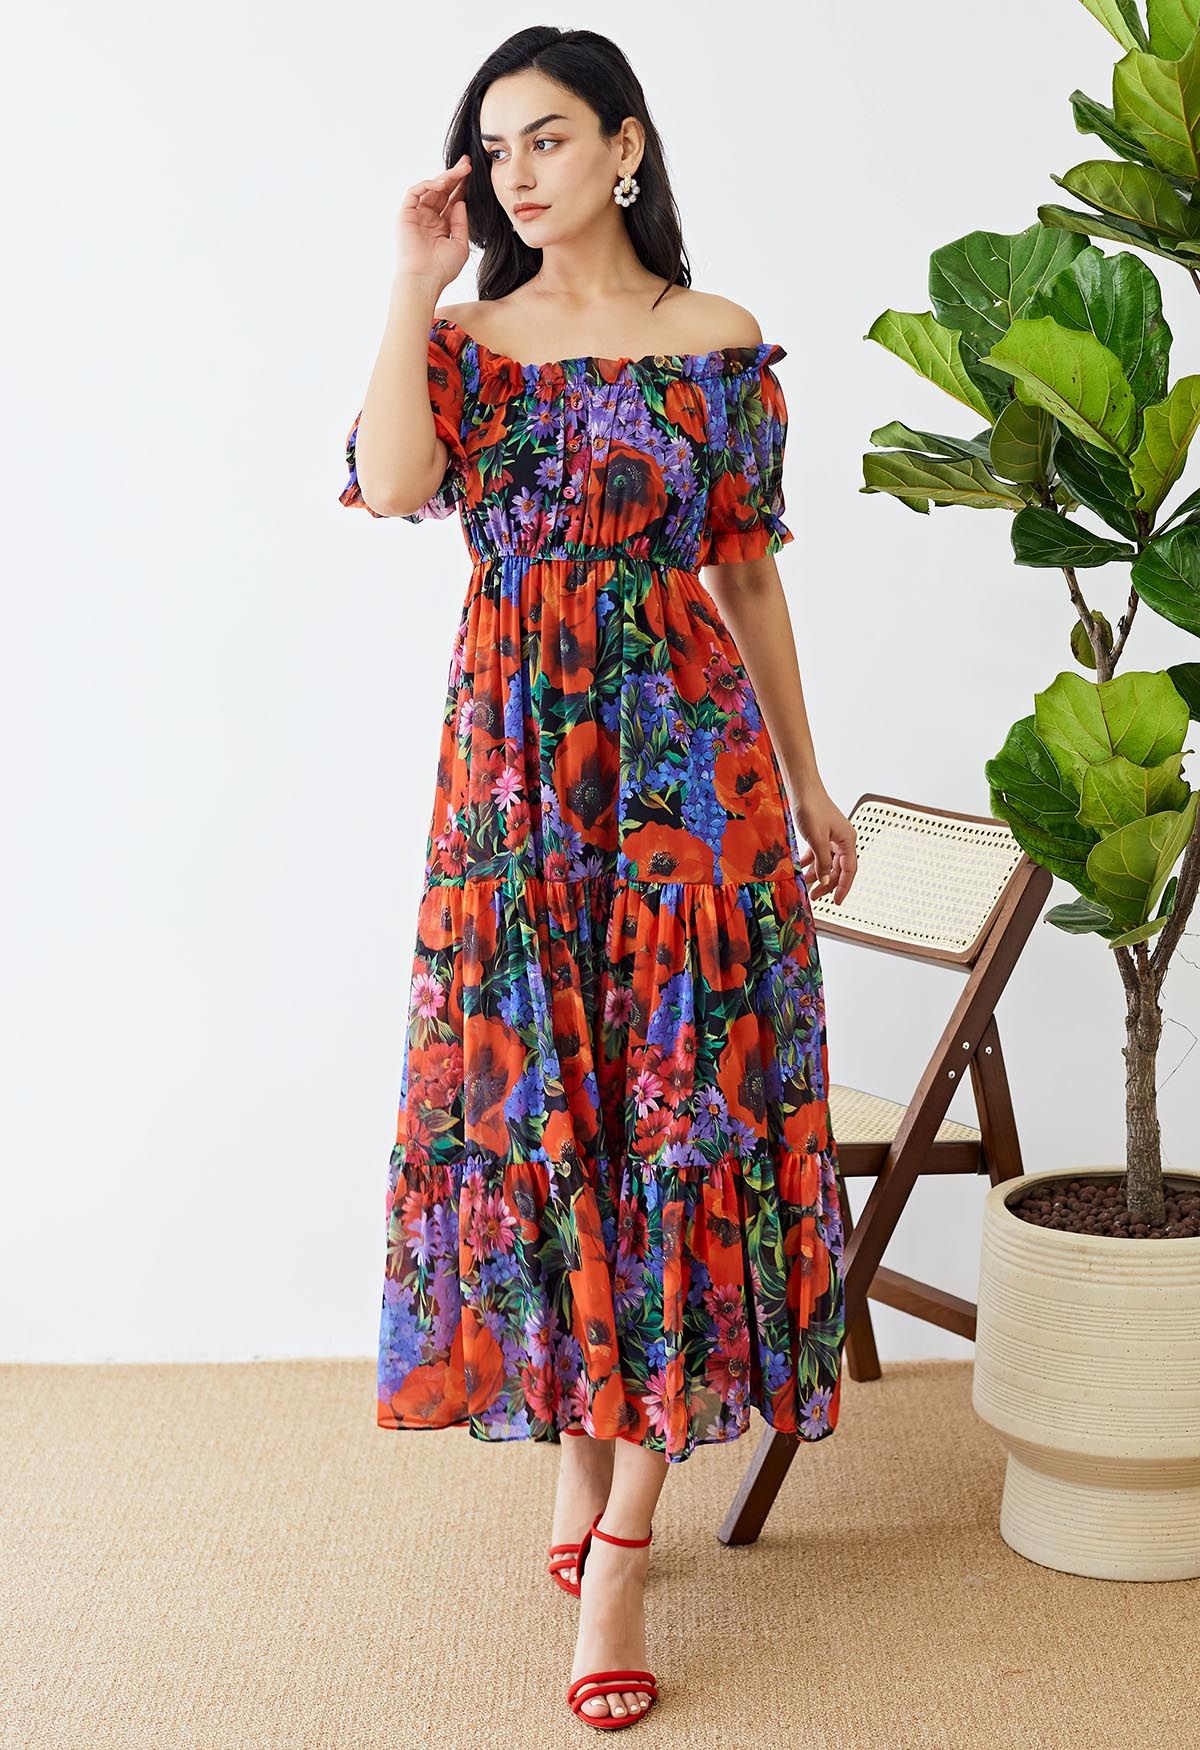 Bright Red Floral Off-Shoulder Chiffon Dress